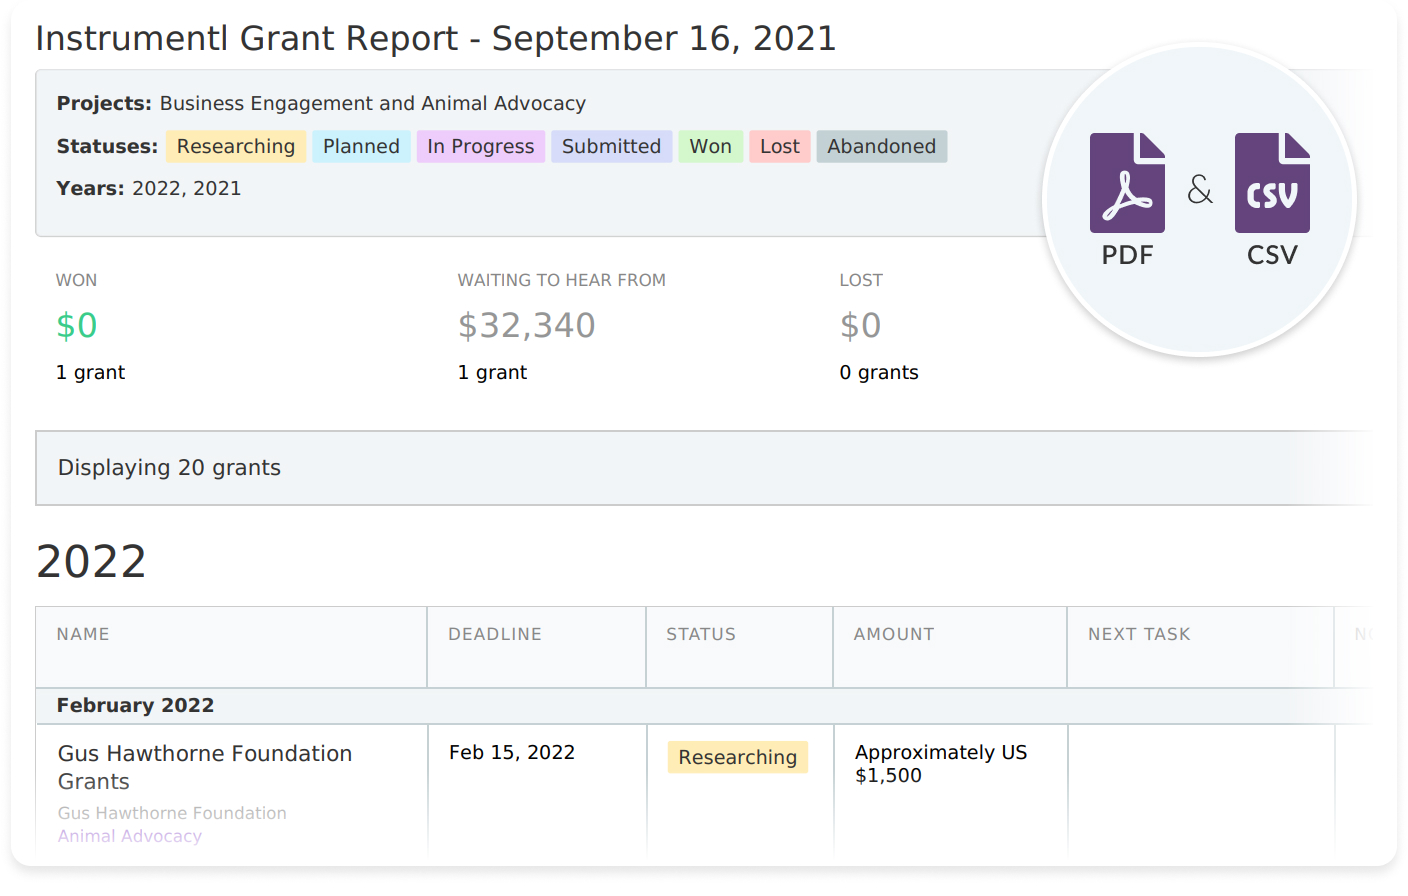 Export your saved grants pipeline into an easy-to-read PDF or CSV, and impress your board members and colleagues.